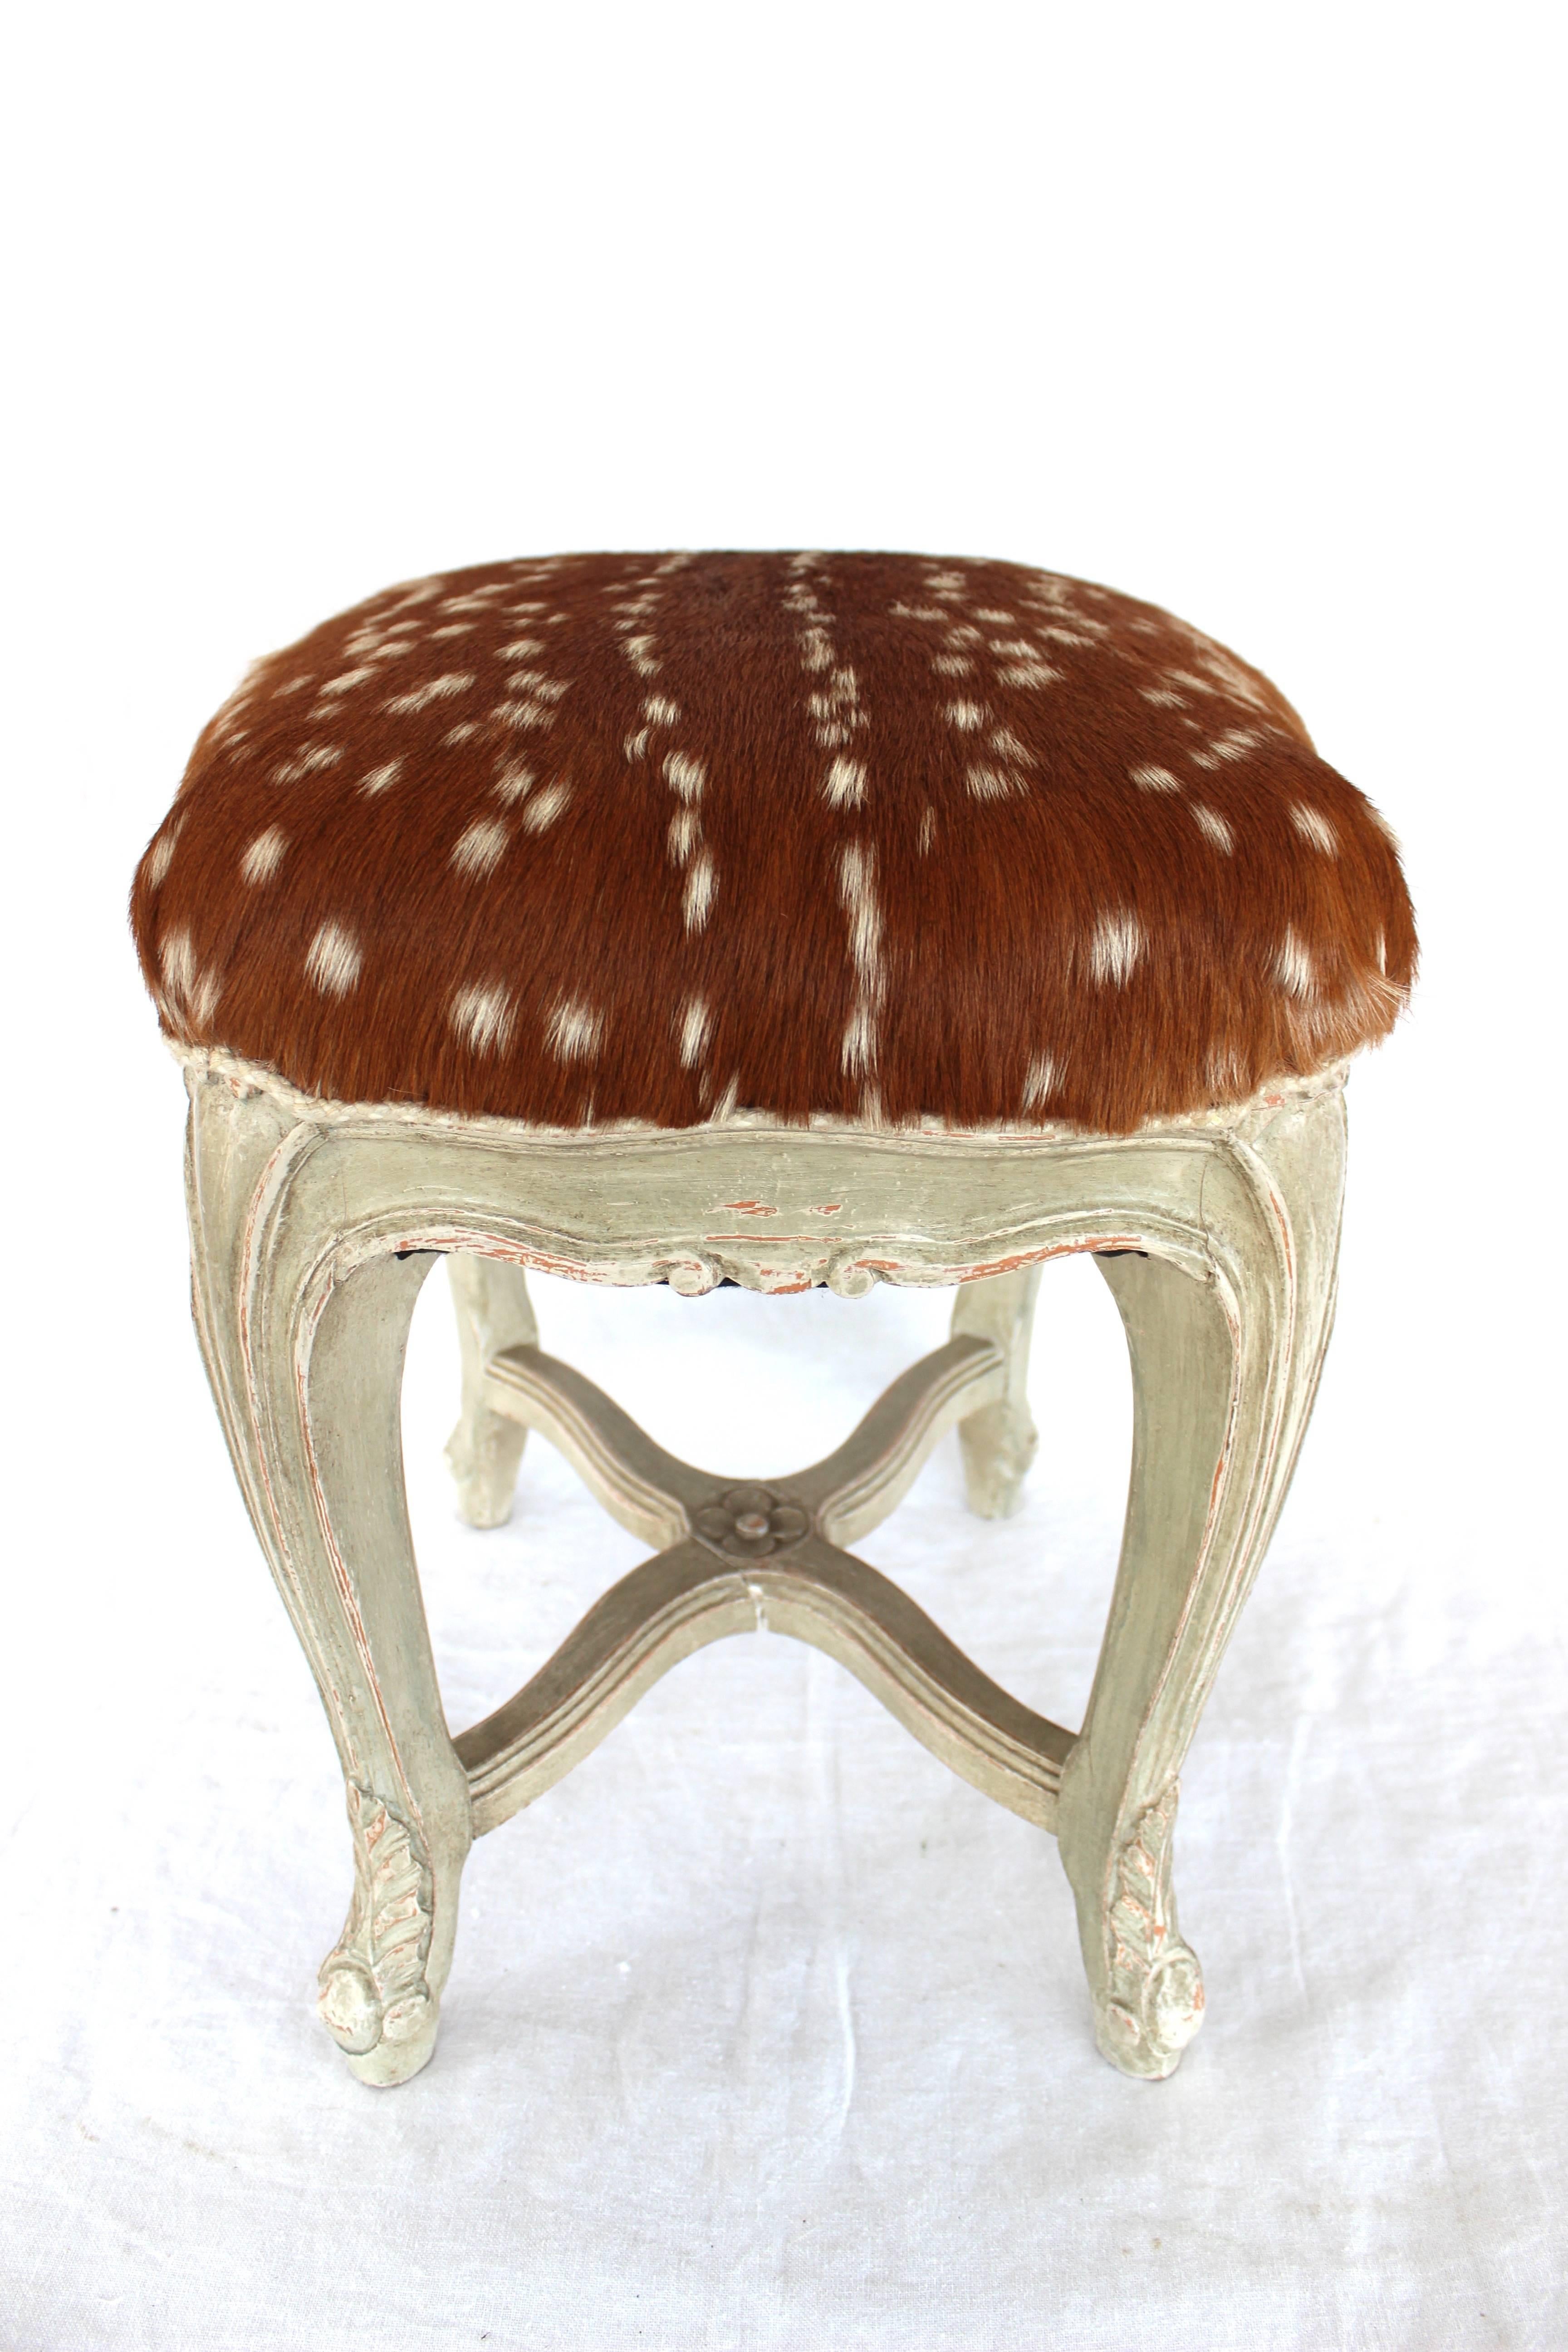 Louis XV Style Stool In Excellent Condition For Sale In East Hampton, NY